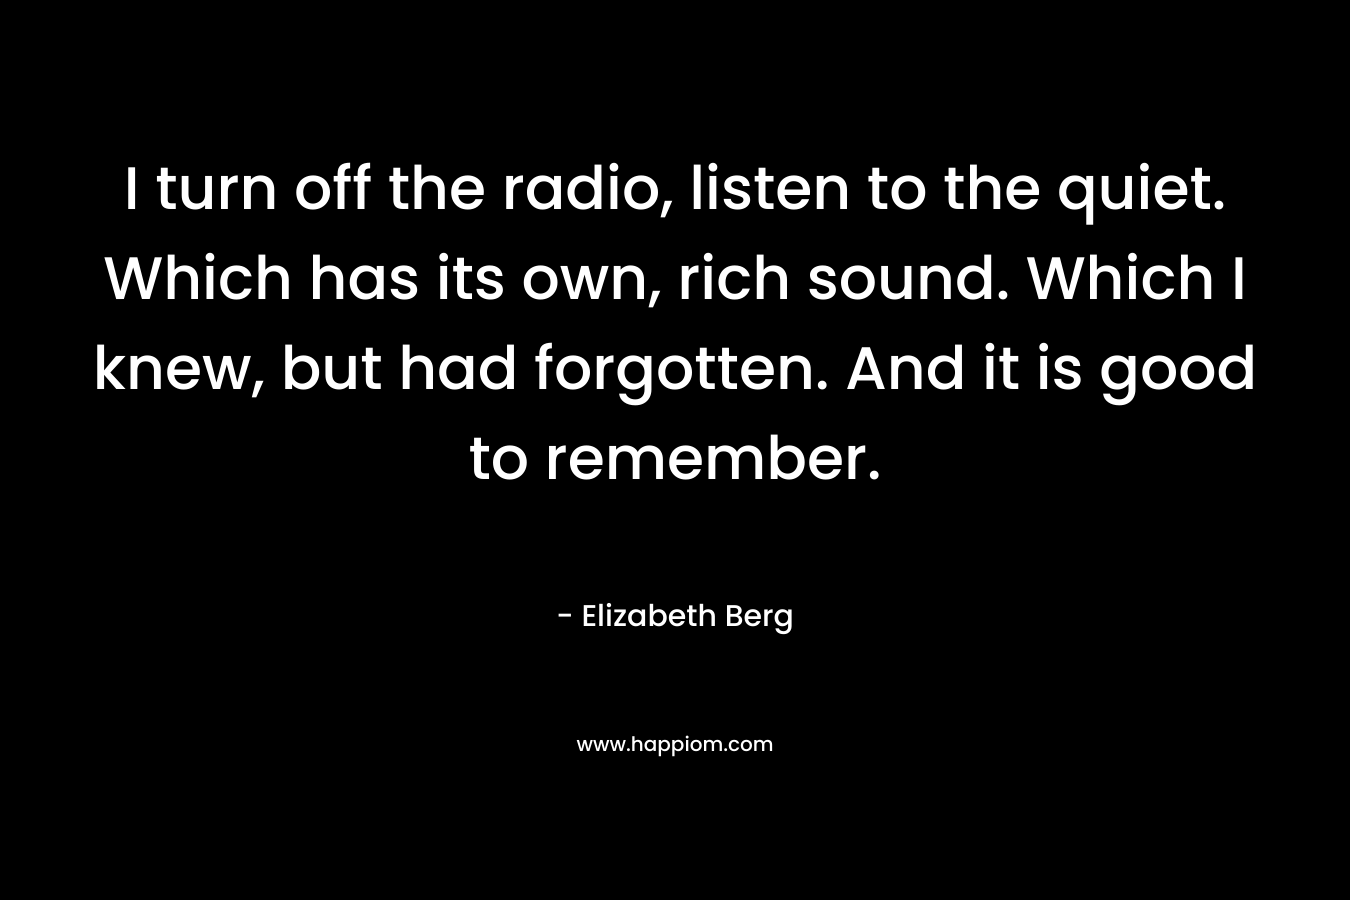 I turn off the radio, listen to the quiet. Which has its own, rich sound. Which I knew, but had forgotten. And it is good to remember. – Elizabeth Berg